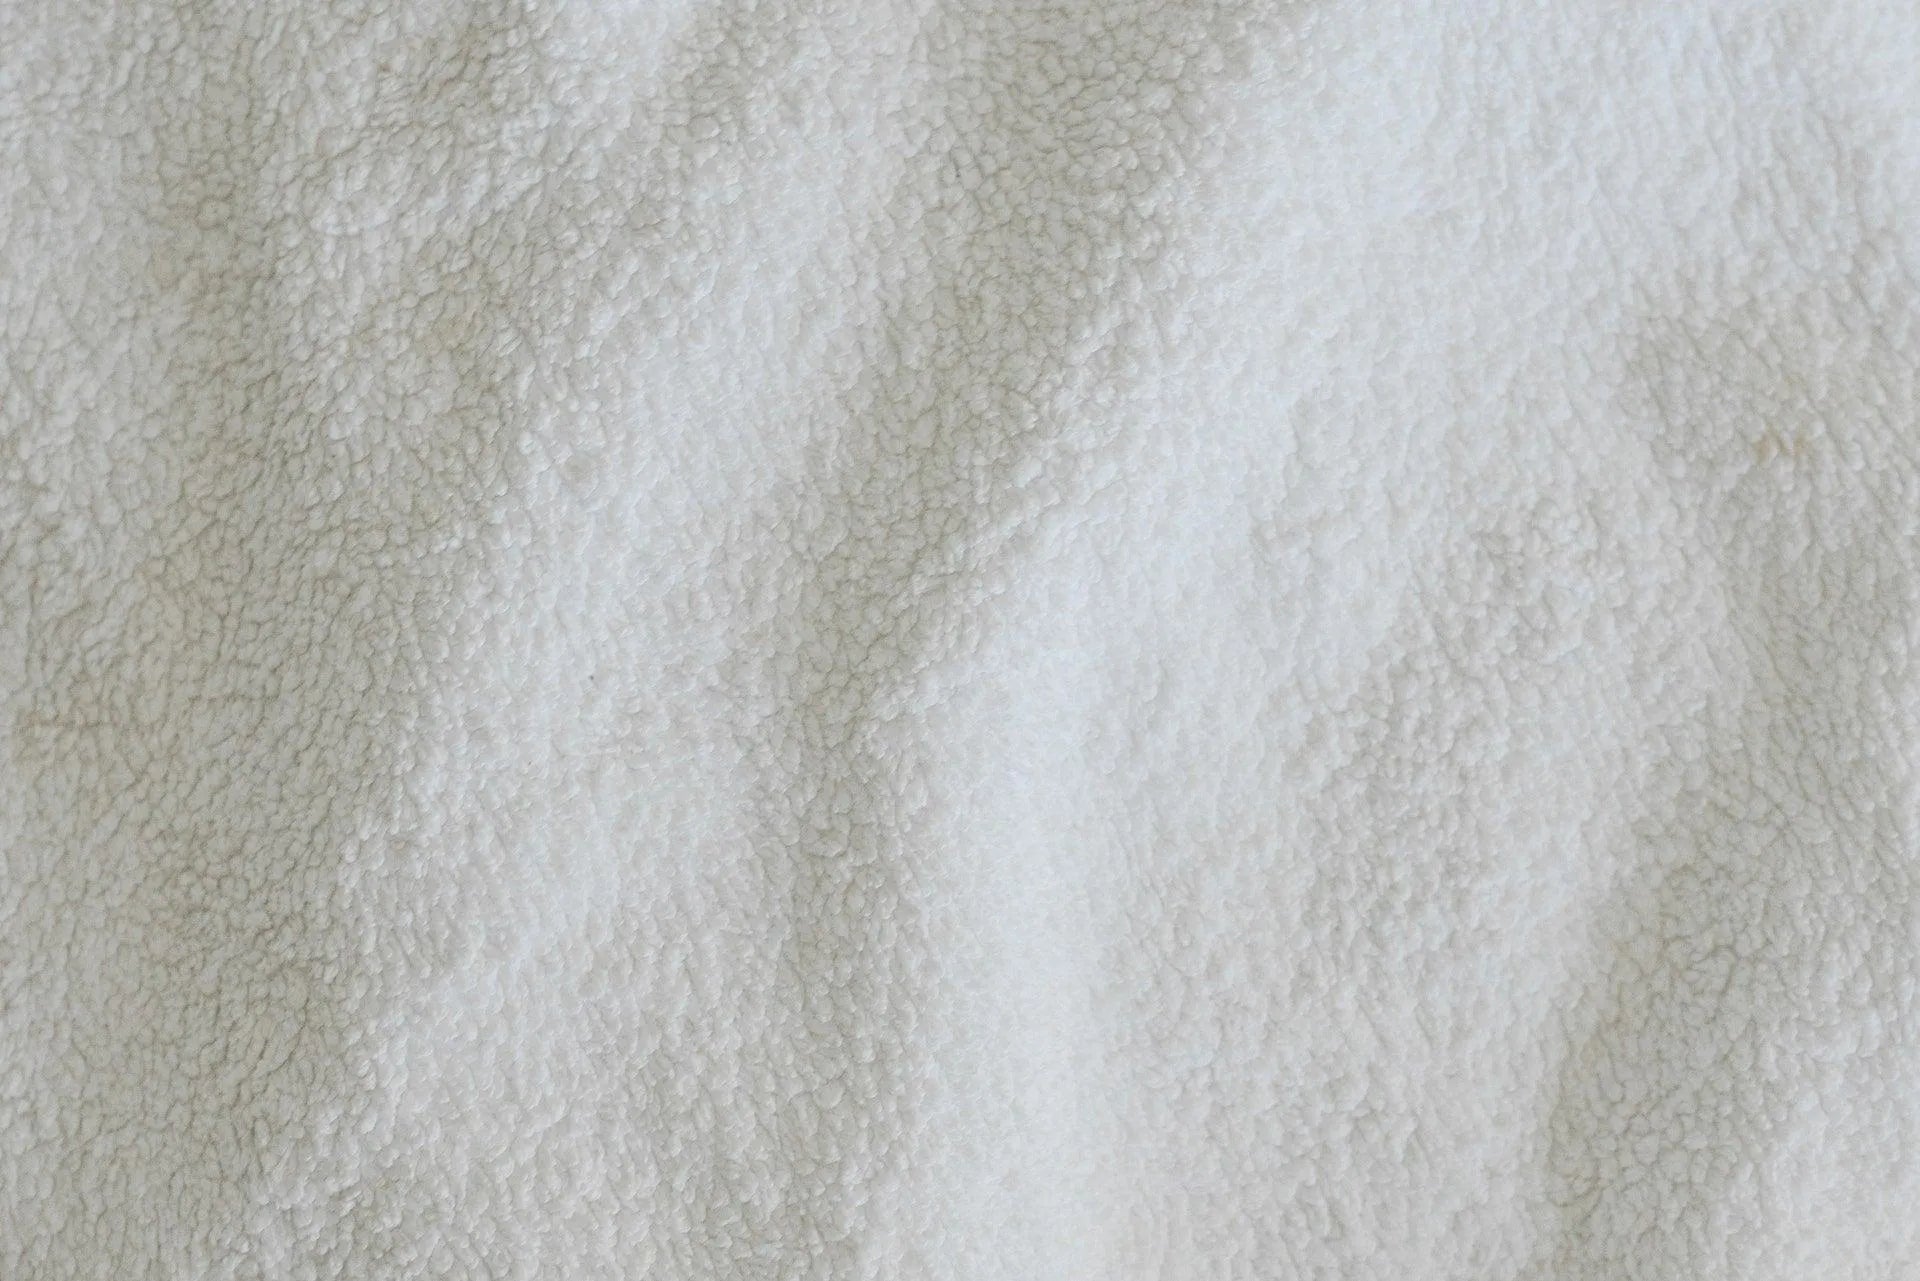 The Many Benefits of Microfiber Fabric: Why You Should Use It